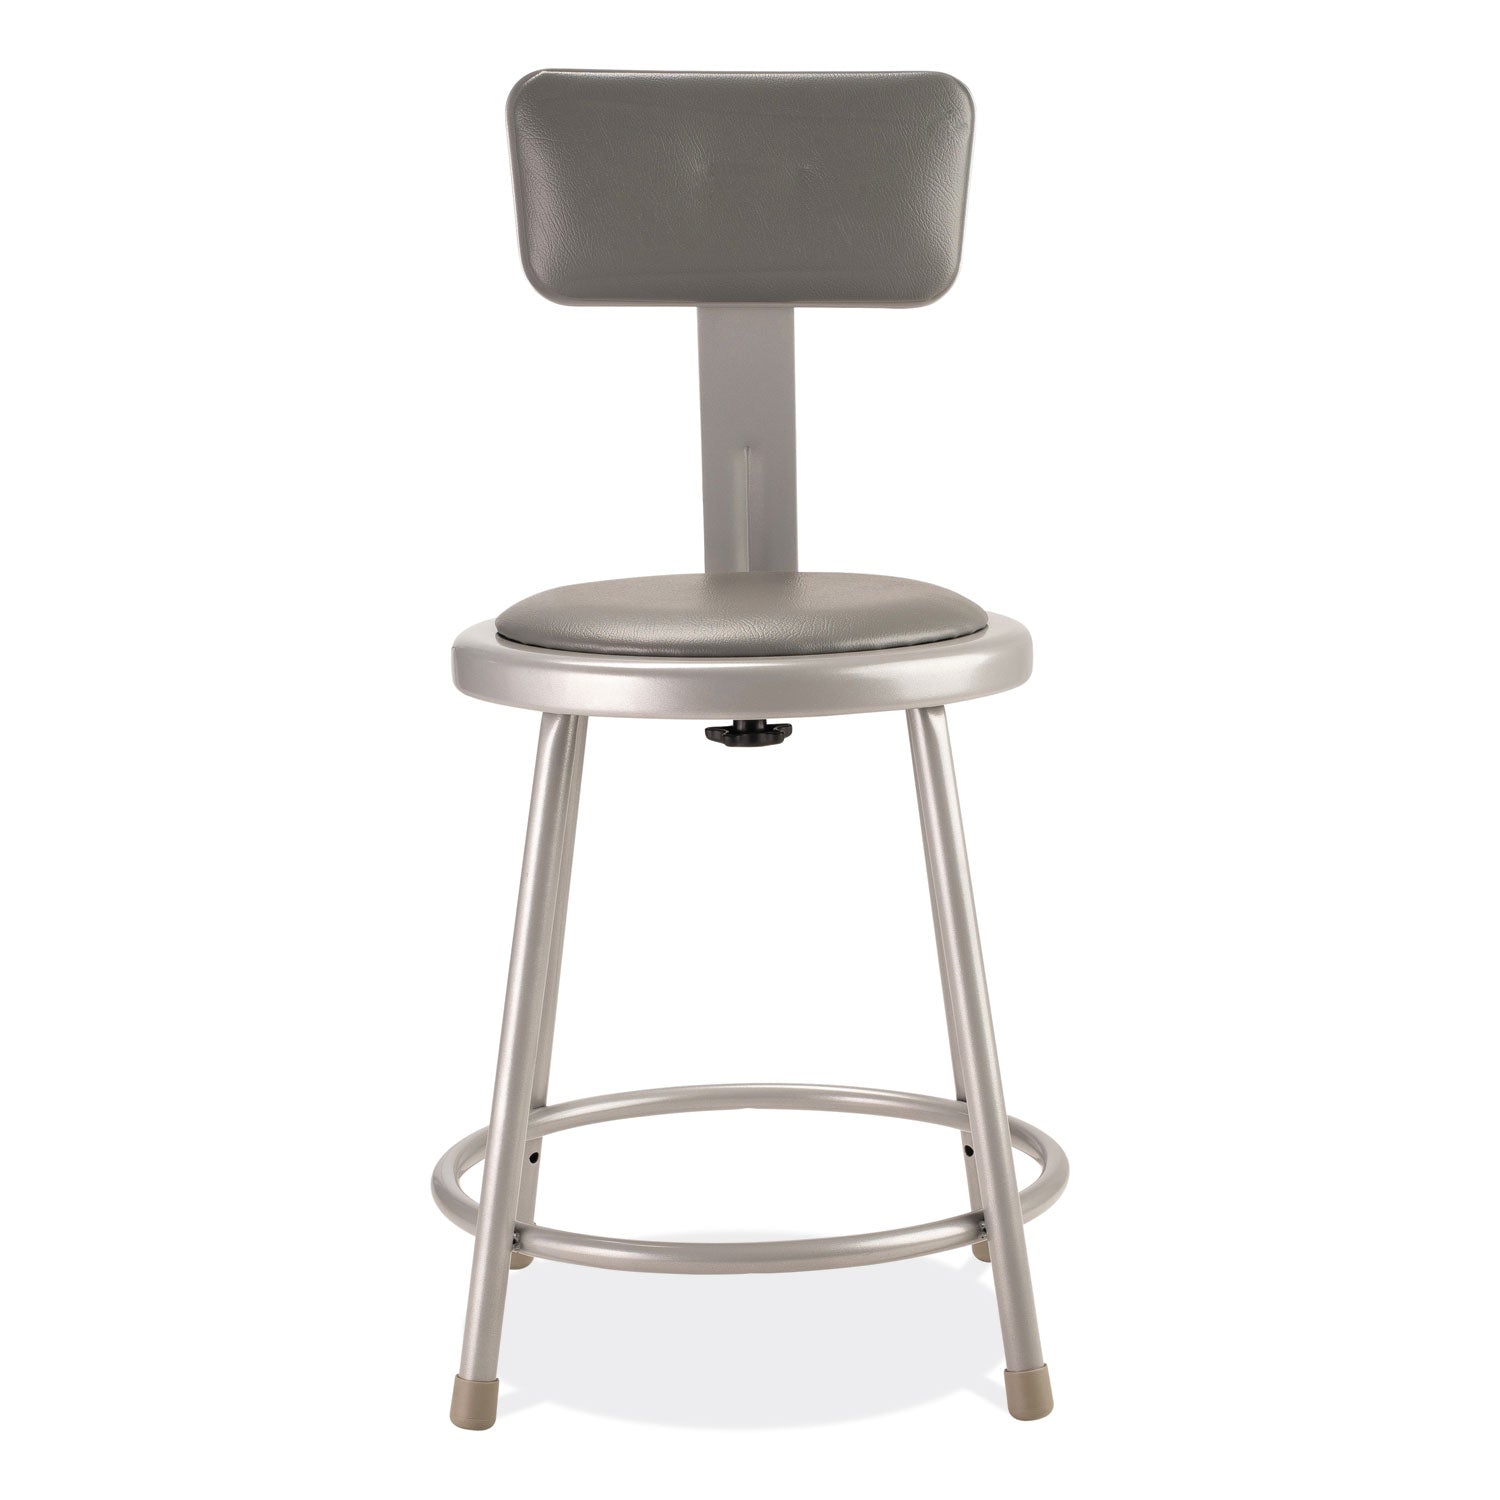 6400-series-heavy-duty-vinyl-padded-stool-w-backrest-supports-300-lb-18-seat-ht-gray-seat-back-baseships-in-1-3-bus-days_nps6418b - 2